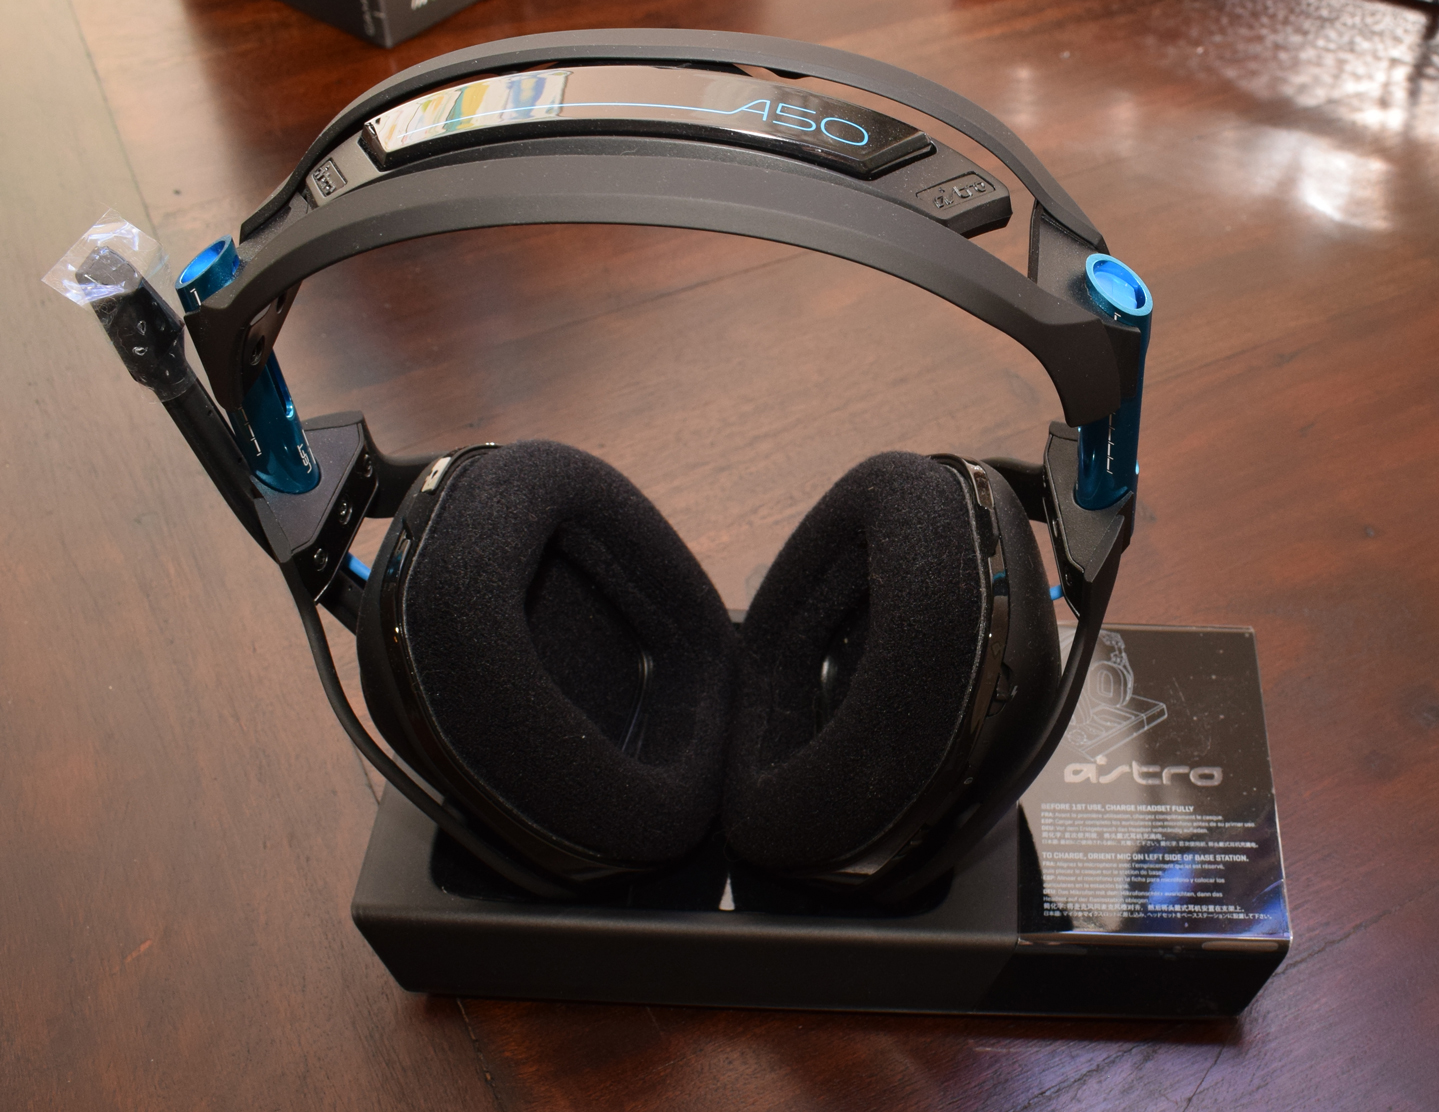 A50 Wireless Headset + Base Station (Gen 3) PS4/PC review